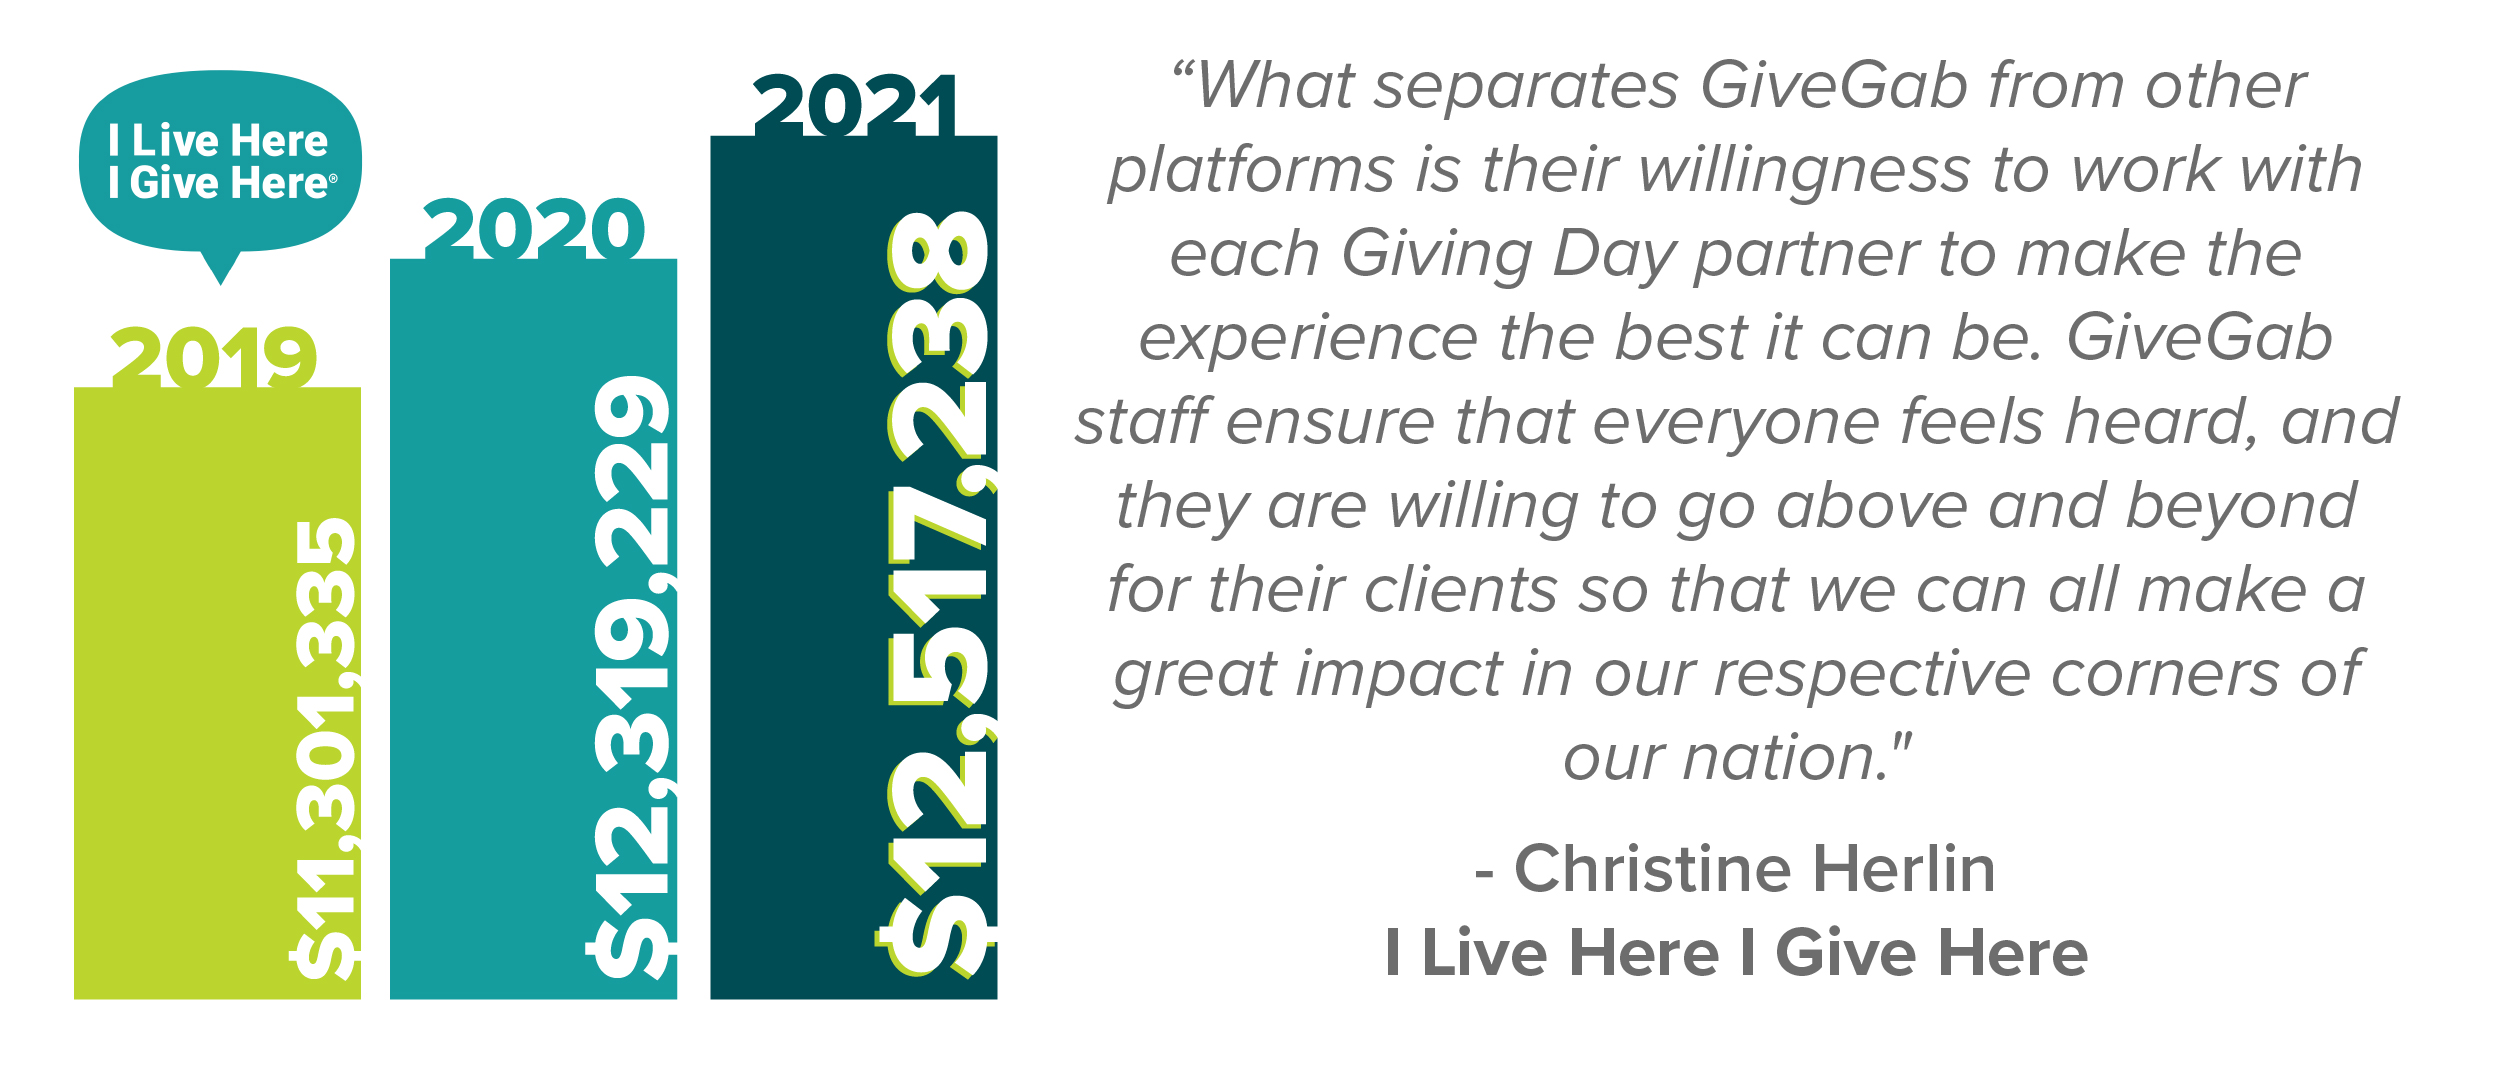 Hear it First From Our Partners: Join our successful Giving Day community where our advanced technology has a proven and unparalleled track record of year-over-year fundraising growth for our repeat Giving Days.